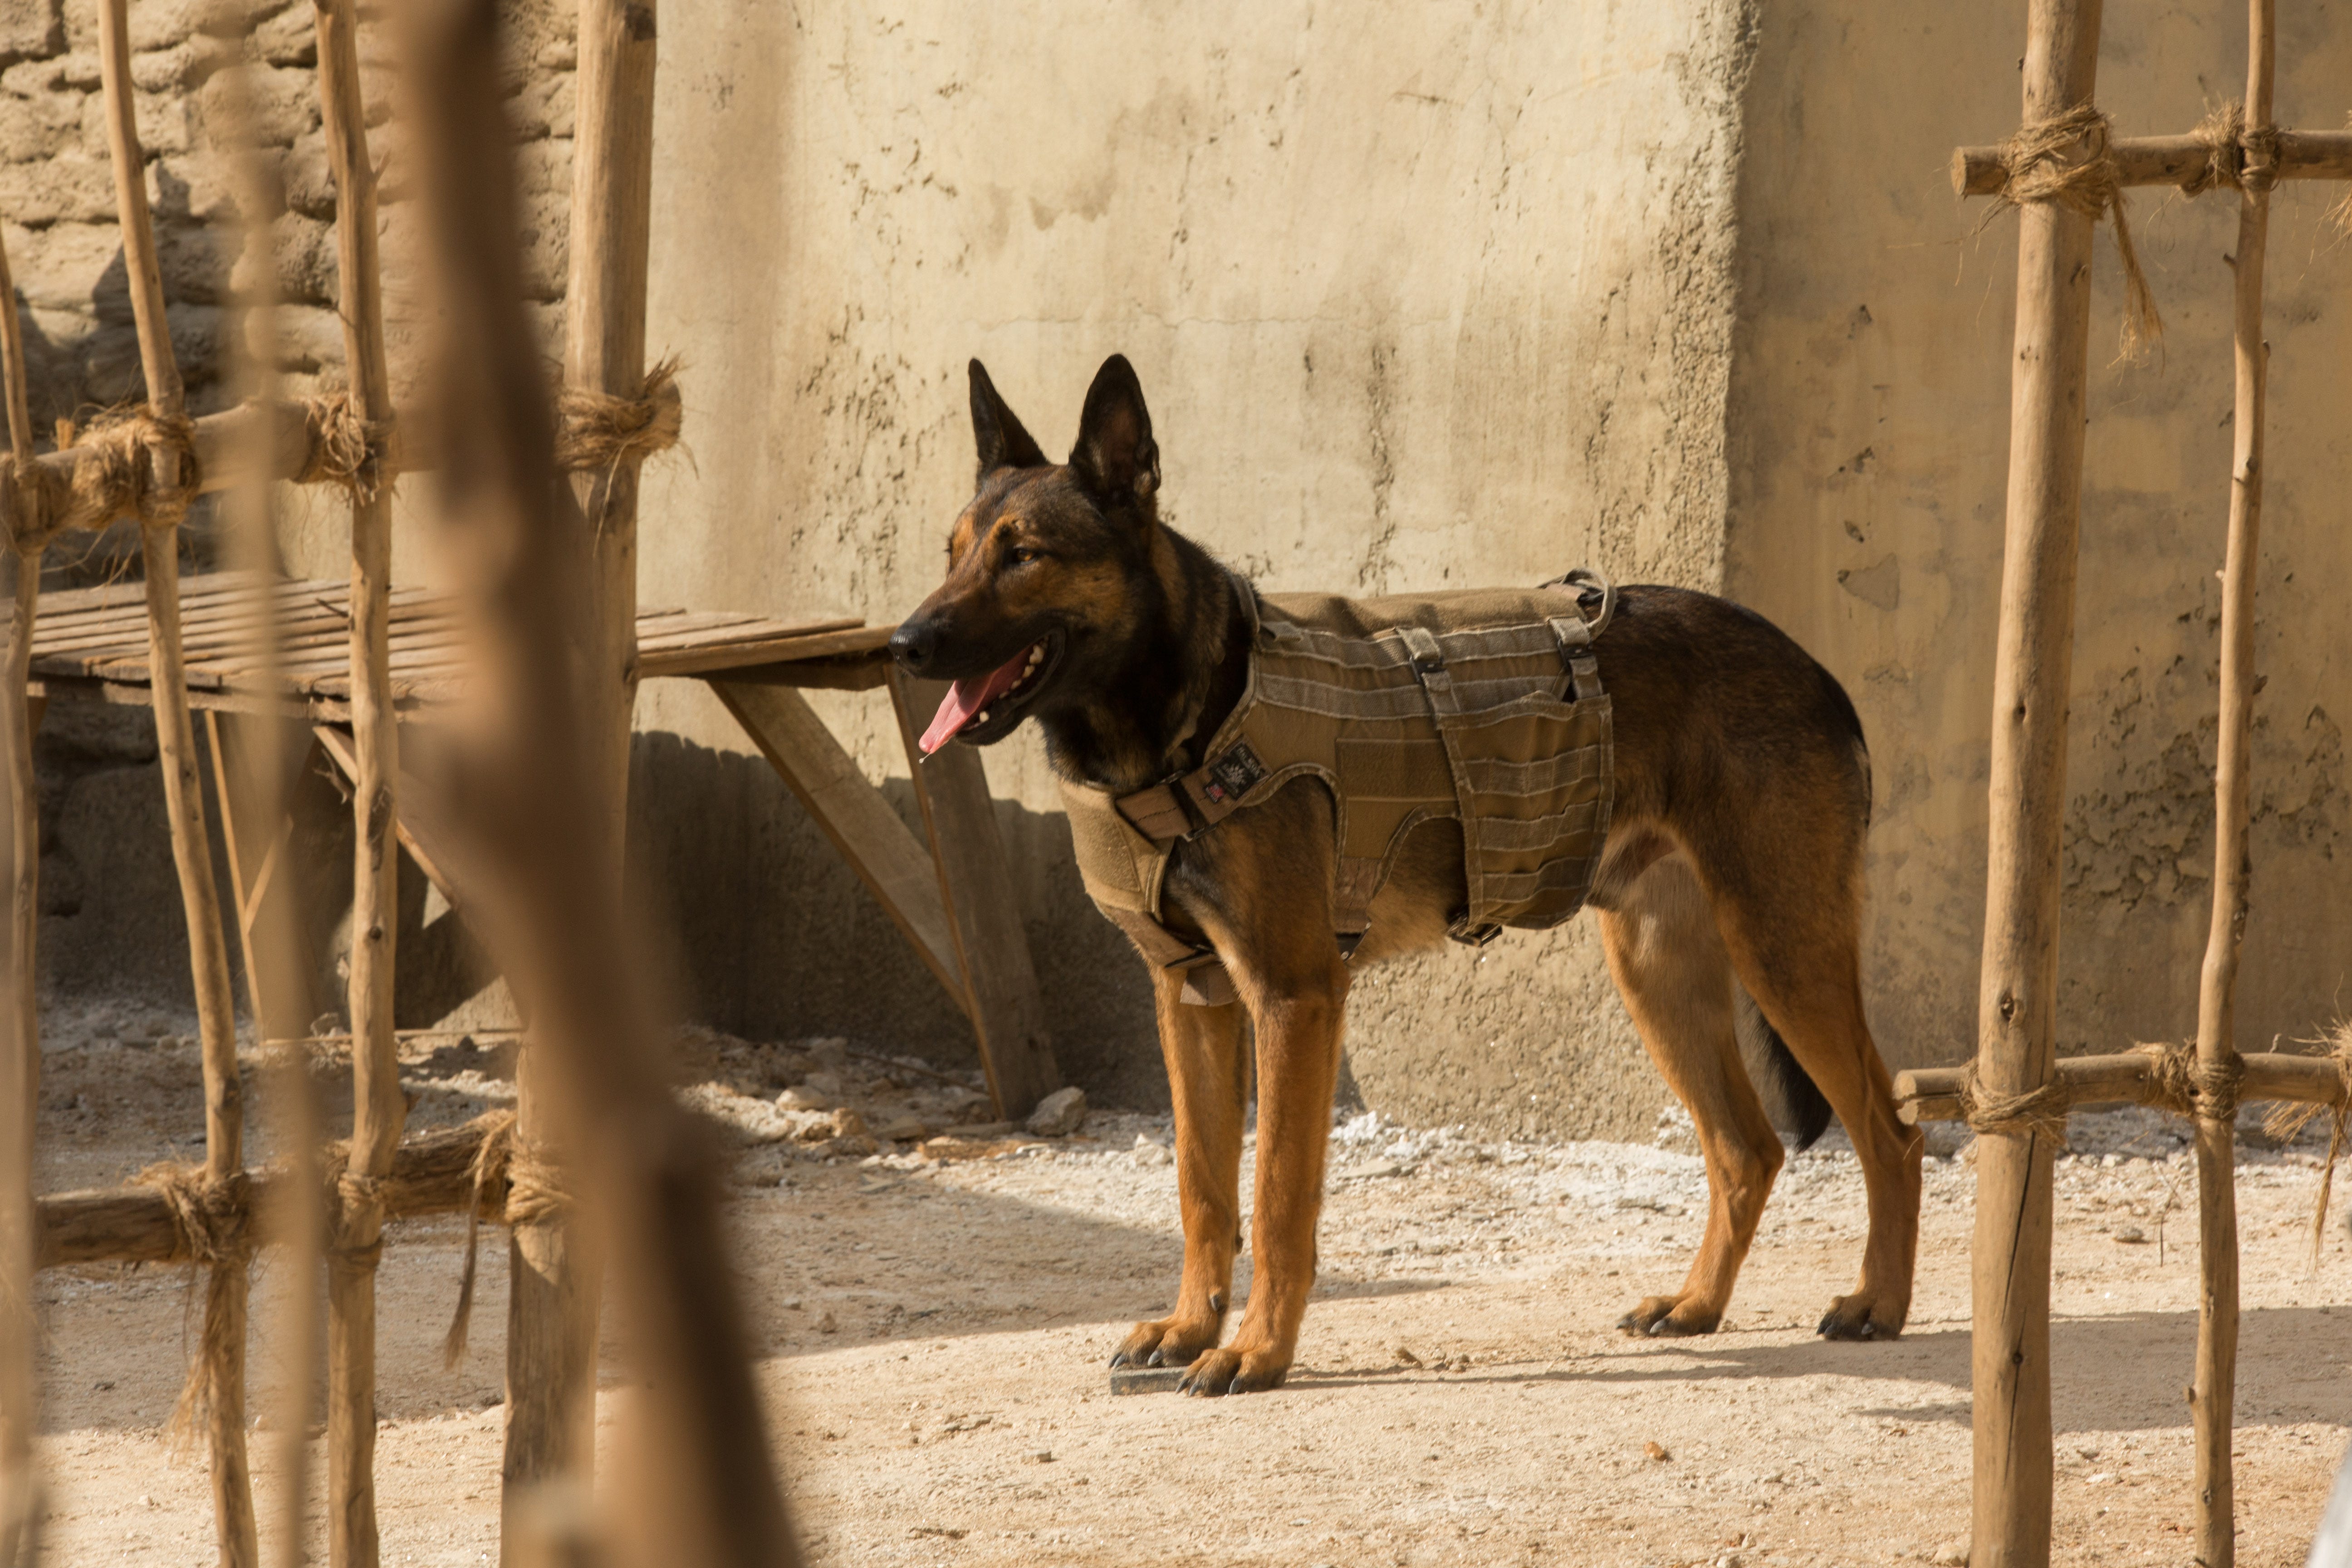 Meet the dog star who plays heroic 'Max'